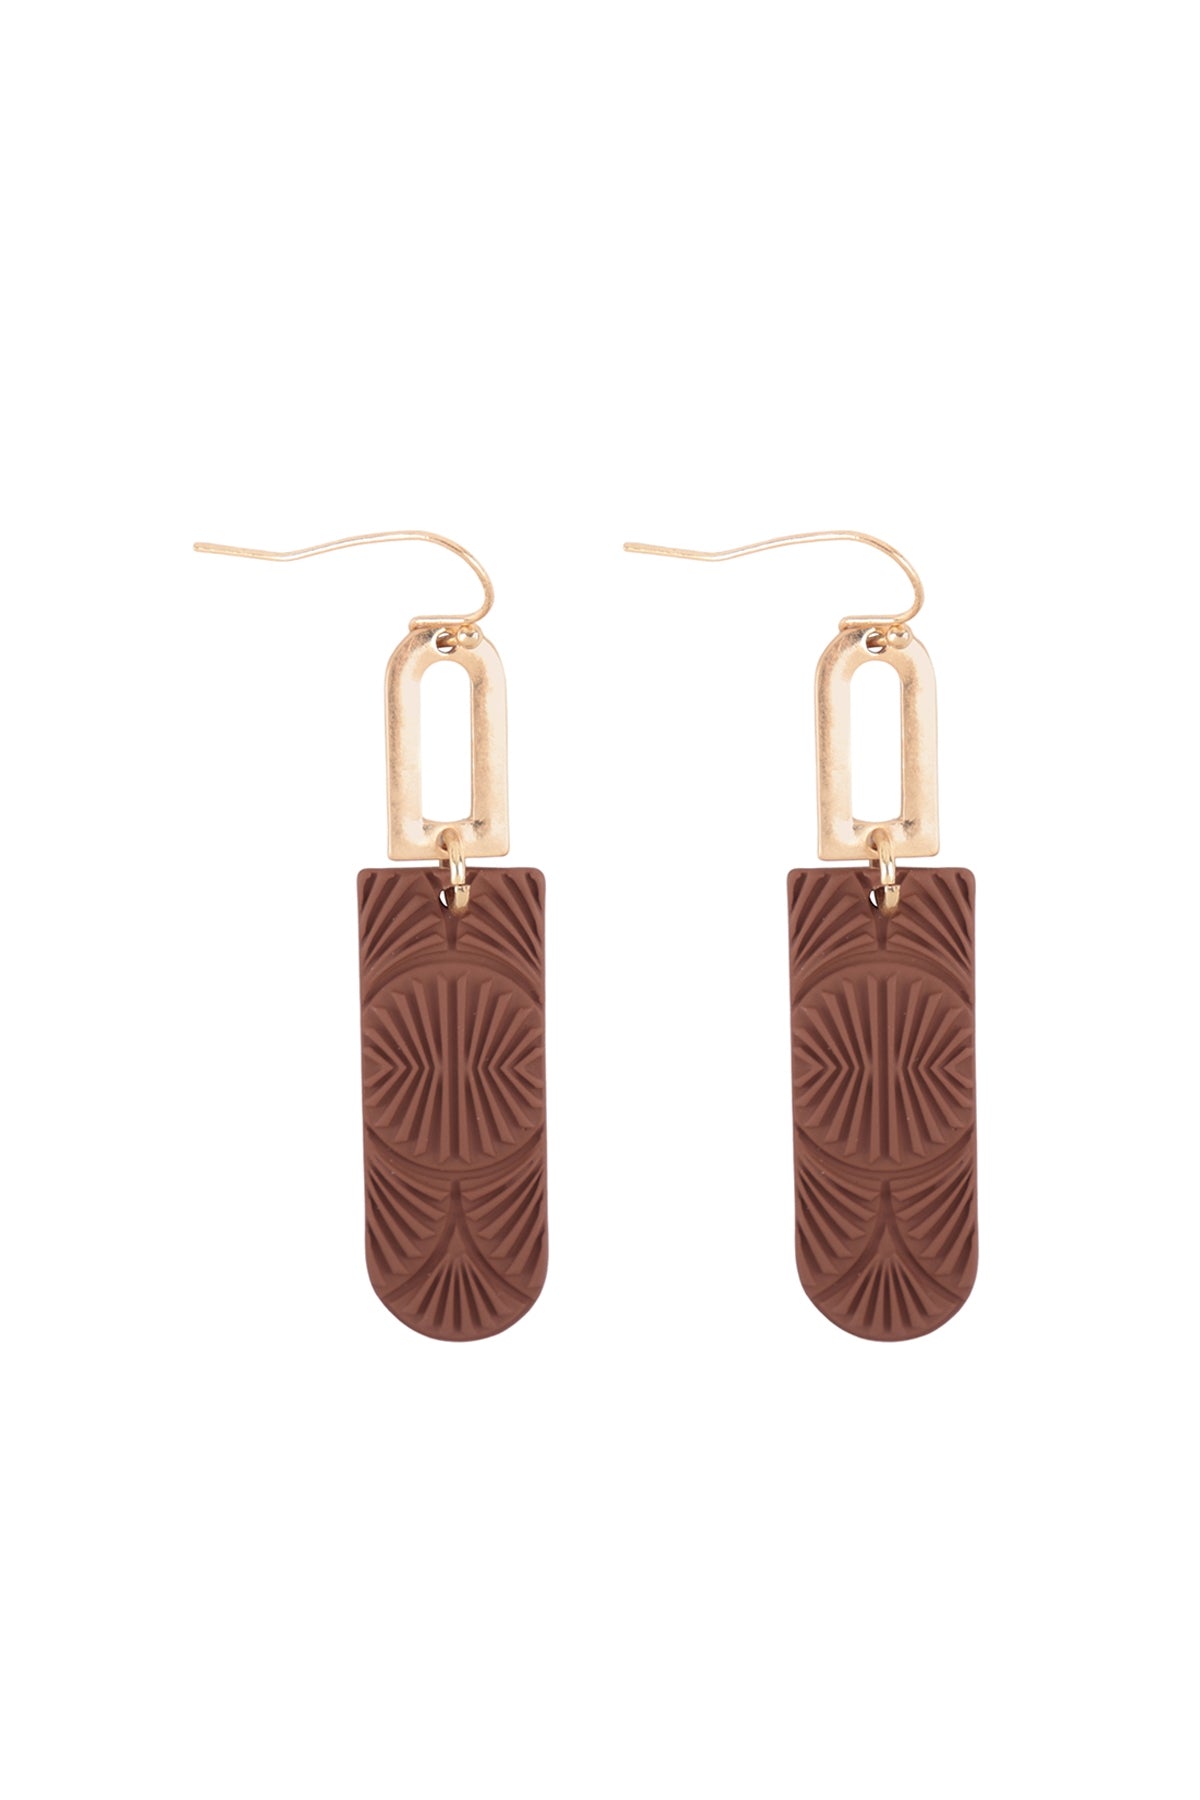 COLOR OVAL PATTERN DANGLING FISH HOOK EARRINGS (NOW $1.50 ONLY!)